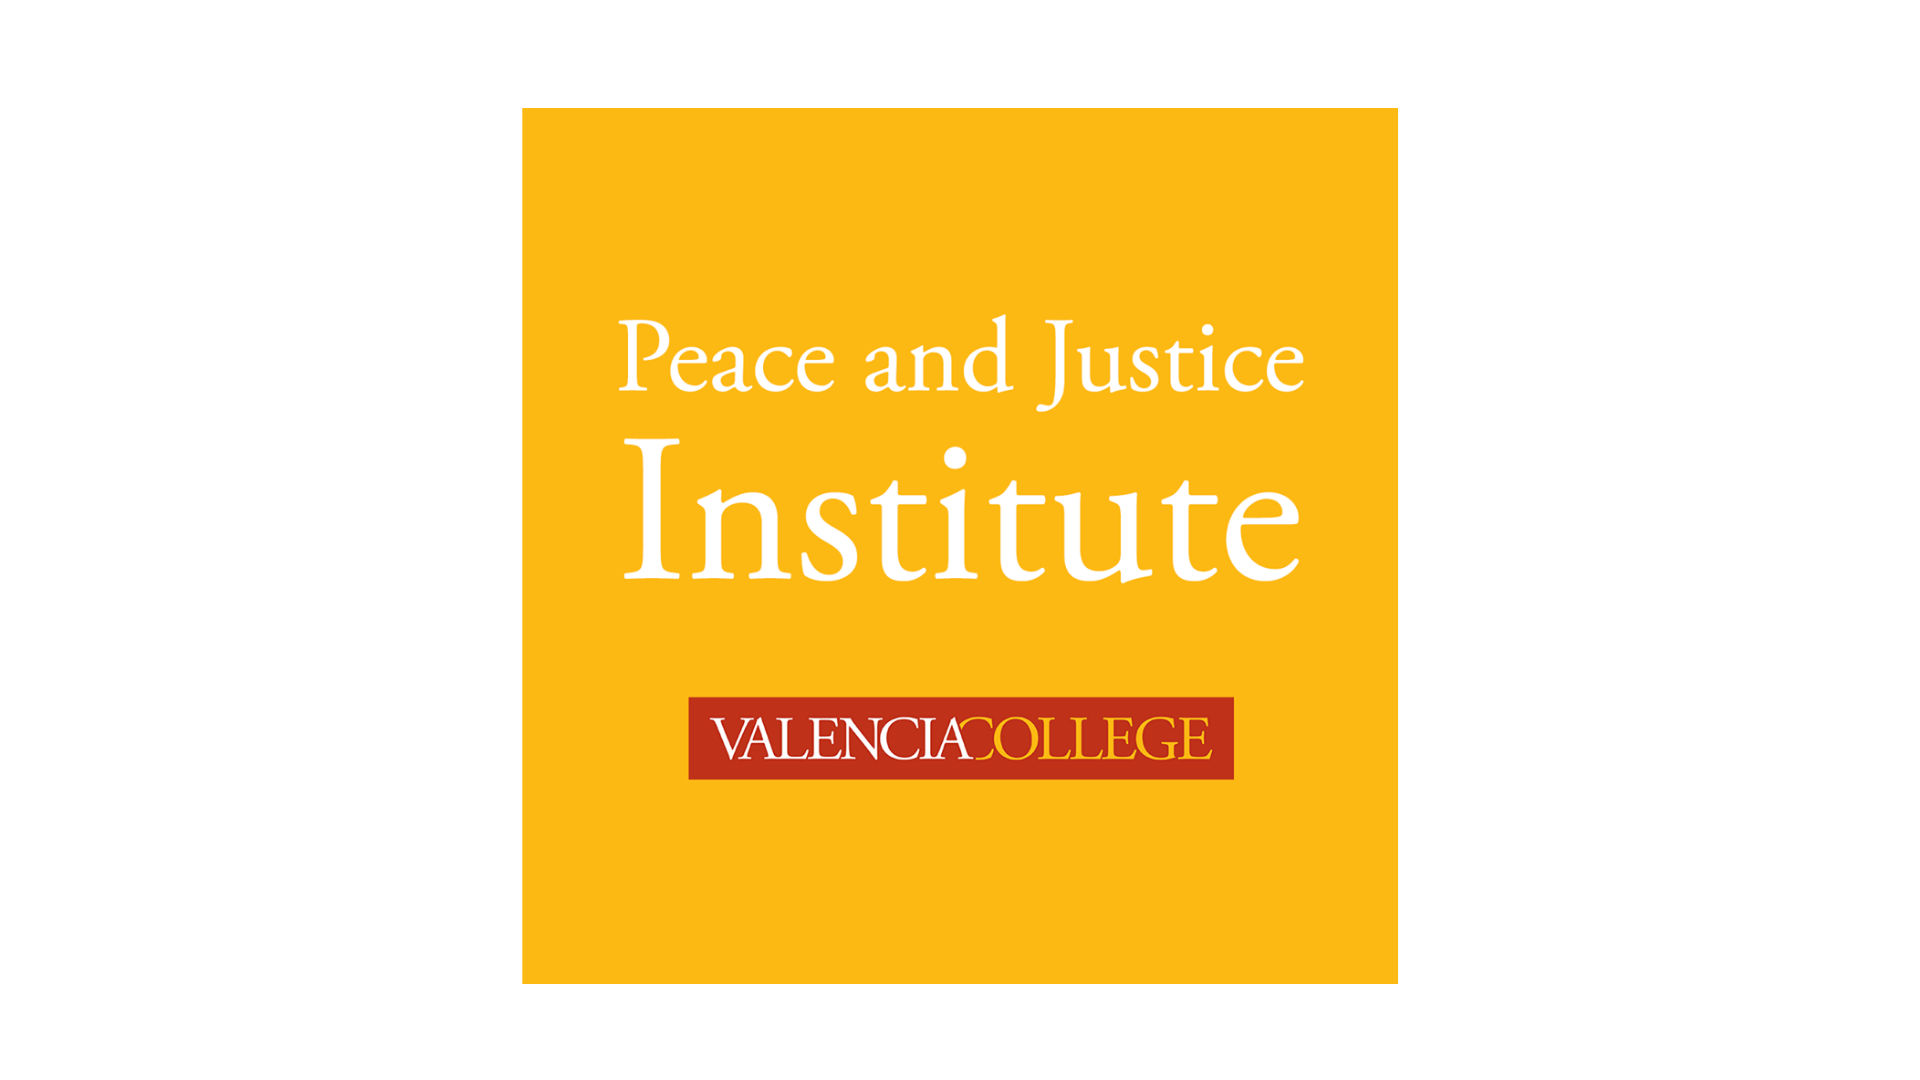 Peace and Justice Institute of Valencia College